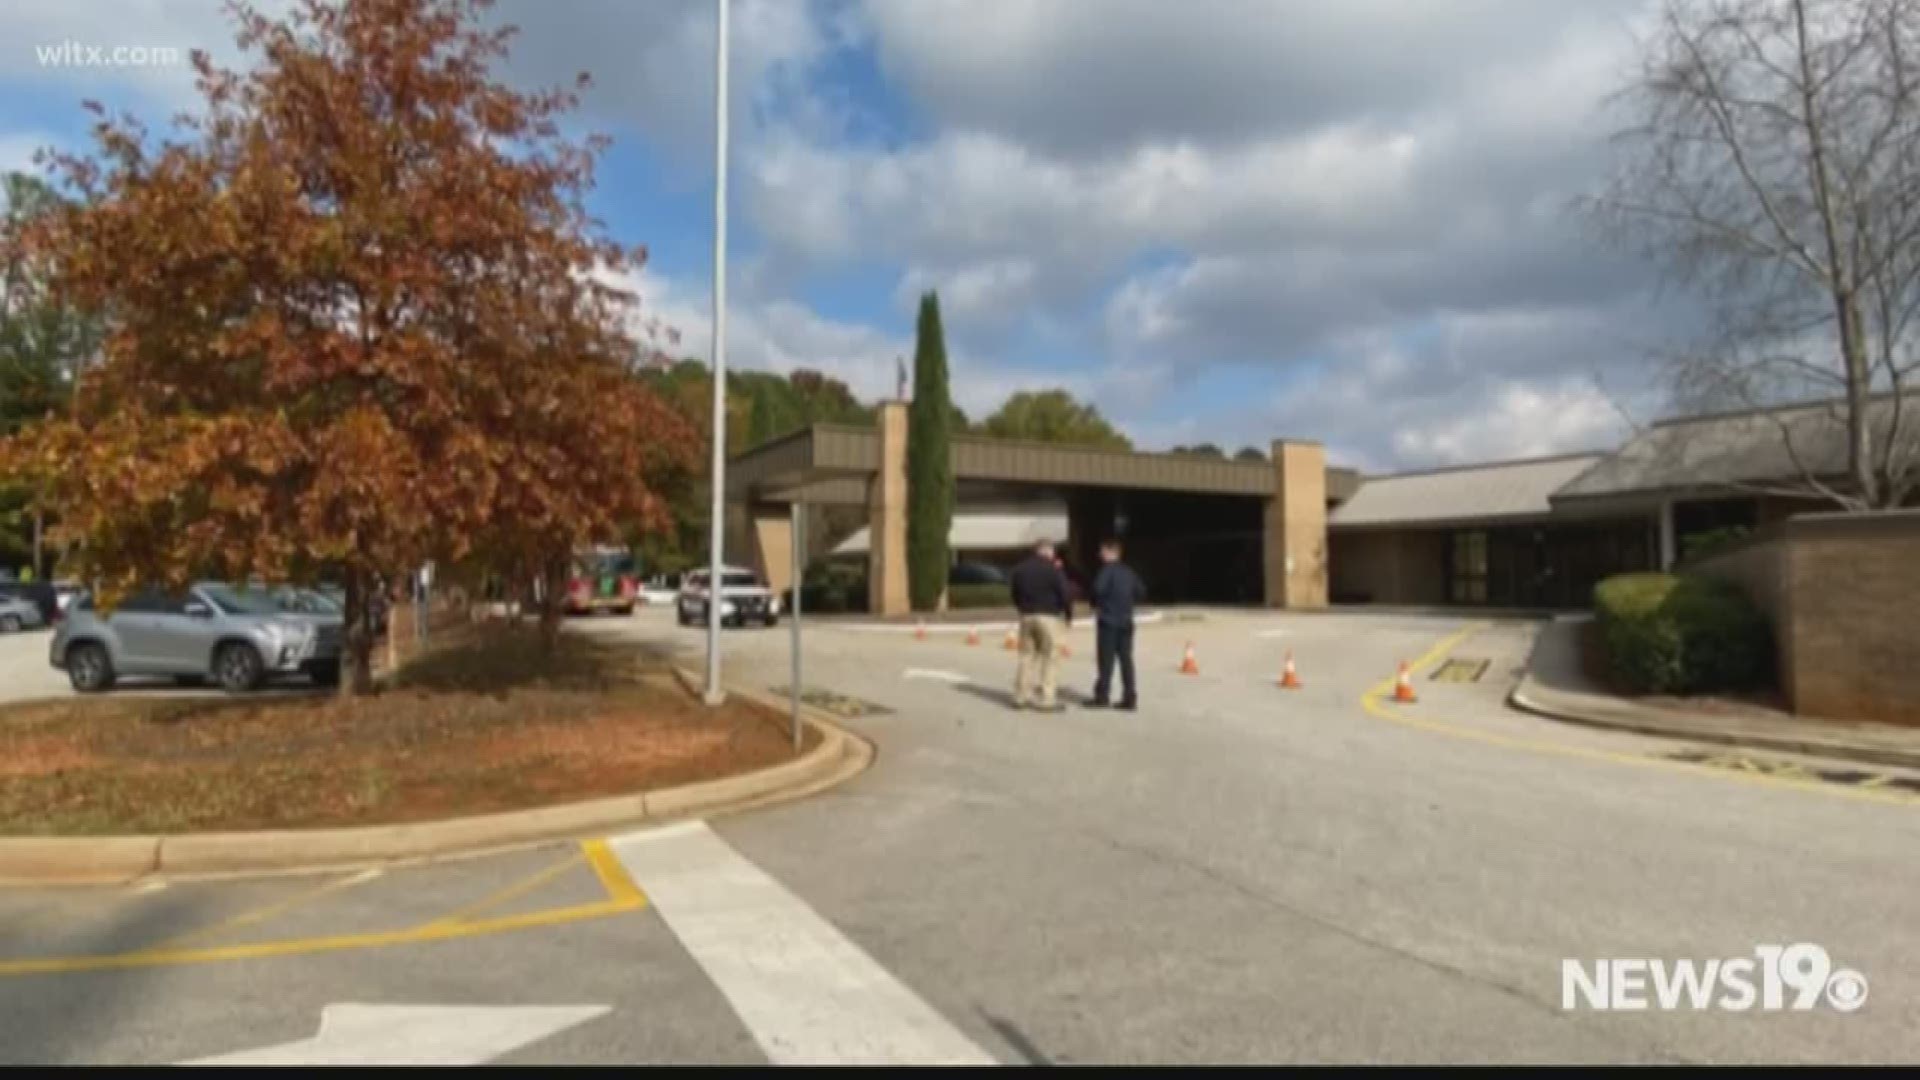 Leapheart Elementary on Piney Grove Road was on a quick lockout today after the Lexington County sheriffs office responded to a call of shots fired near the school.